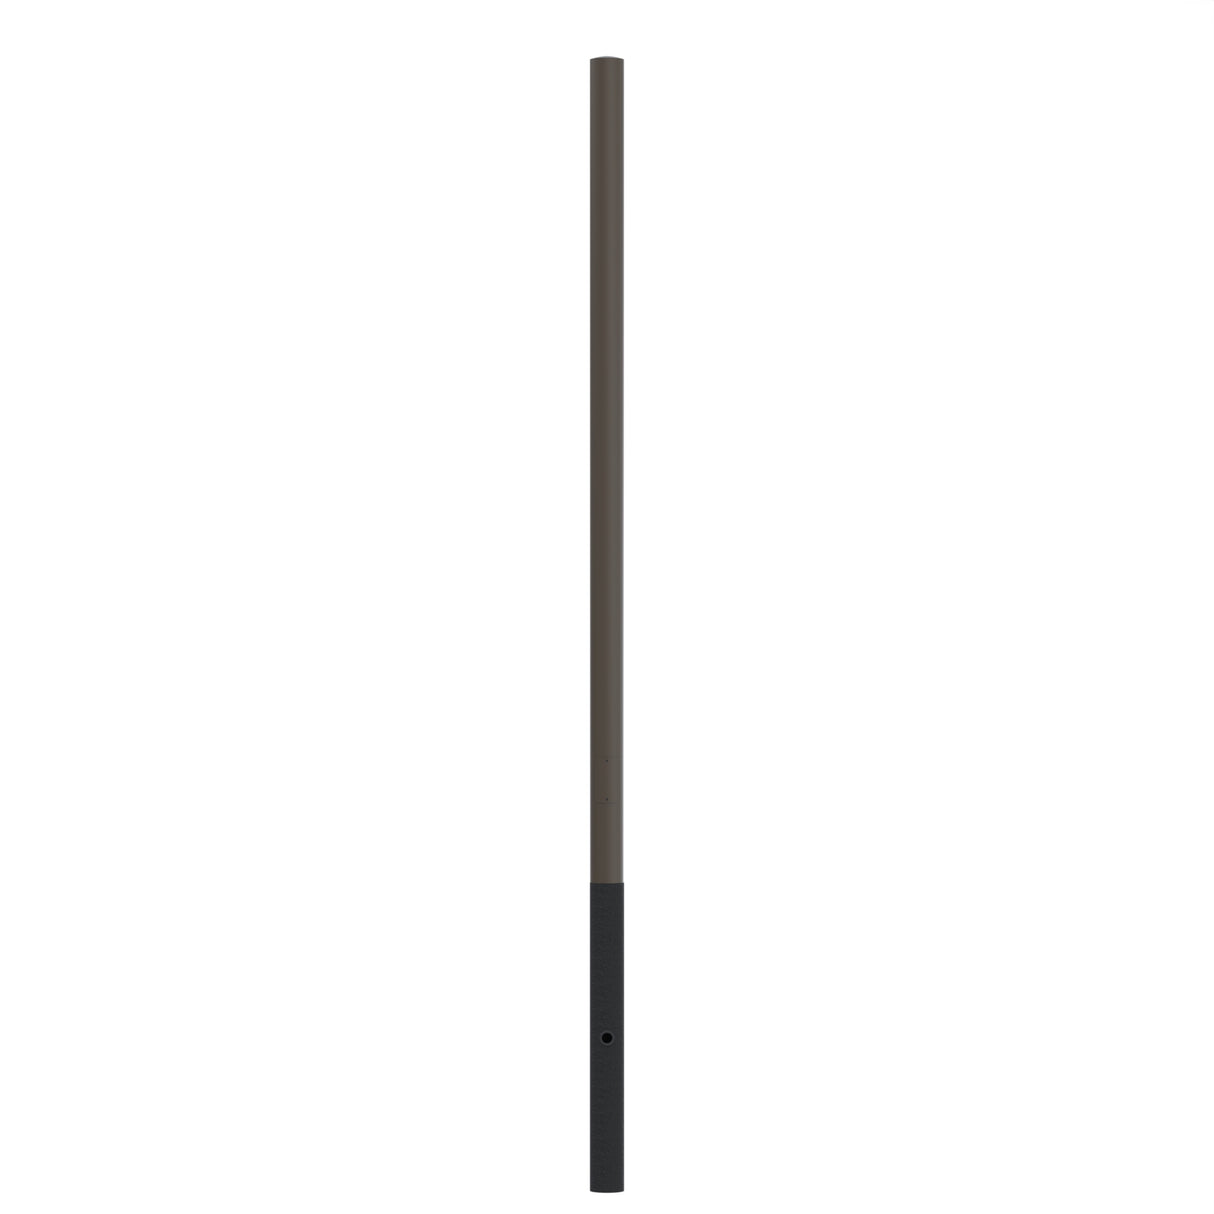 16' Above Grade x 4.0" OD  x 0.125" Thick, Round Straight Aluminum, Direct Burial Light Pole